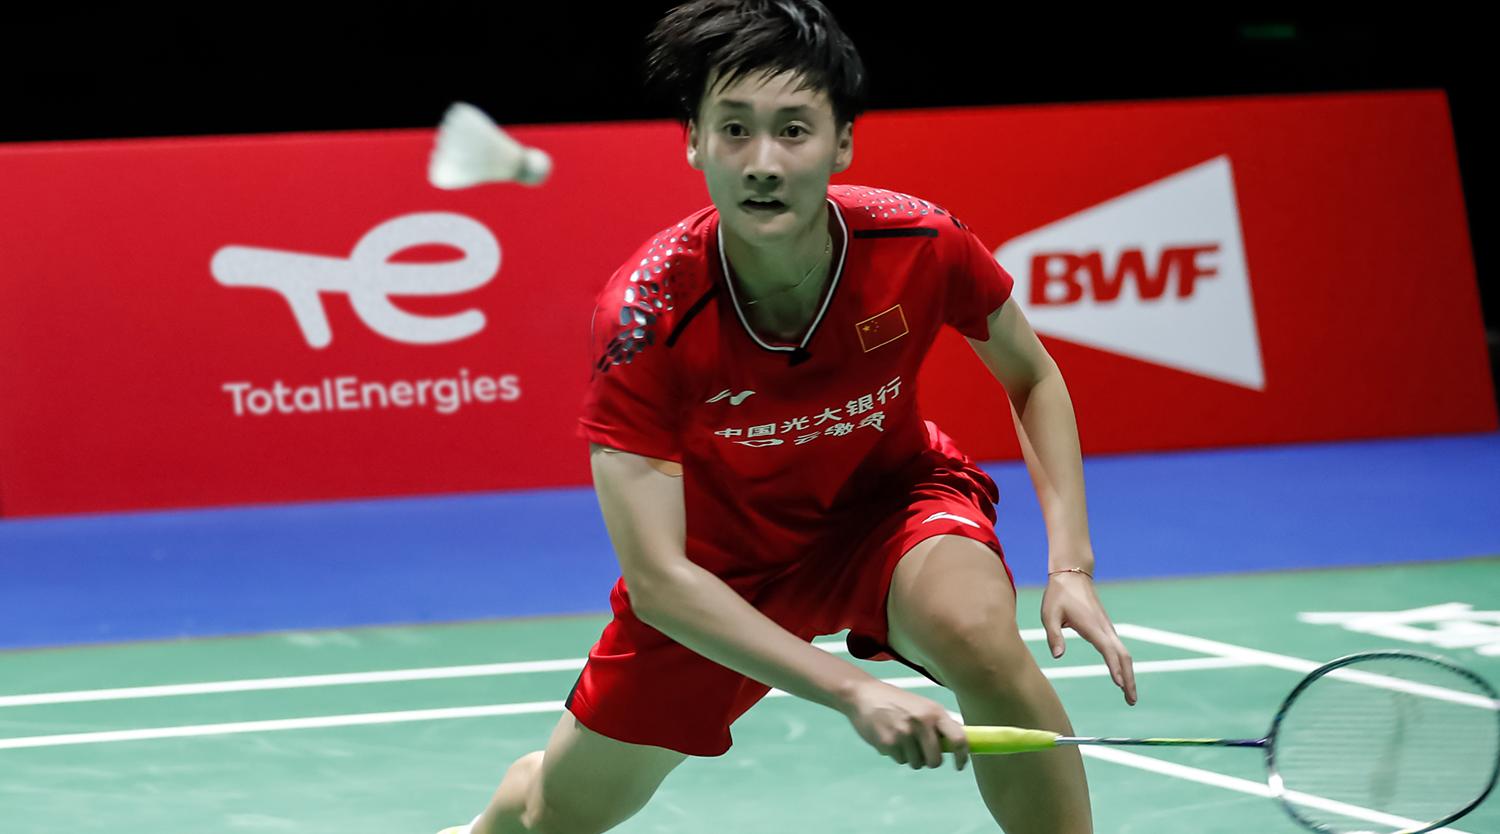 TotalEnergies is Official Title Sponsor of BWF Major Championships until 2025 TotalEnergies